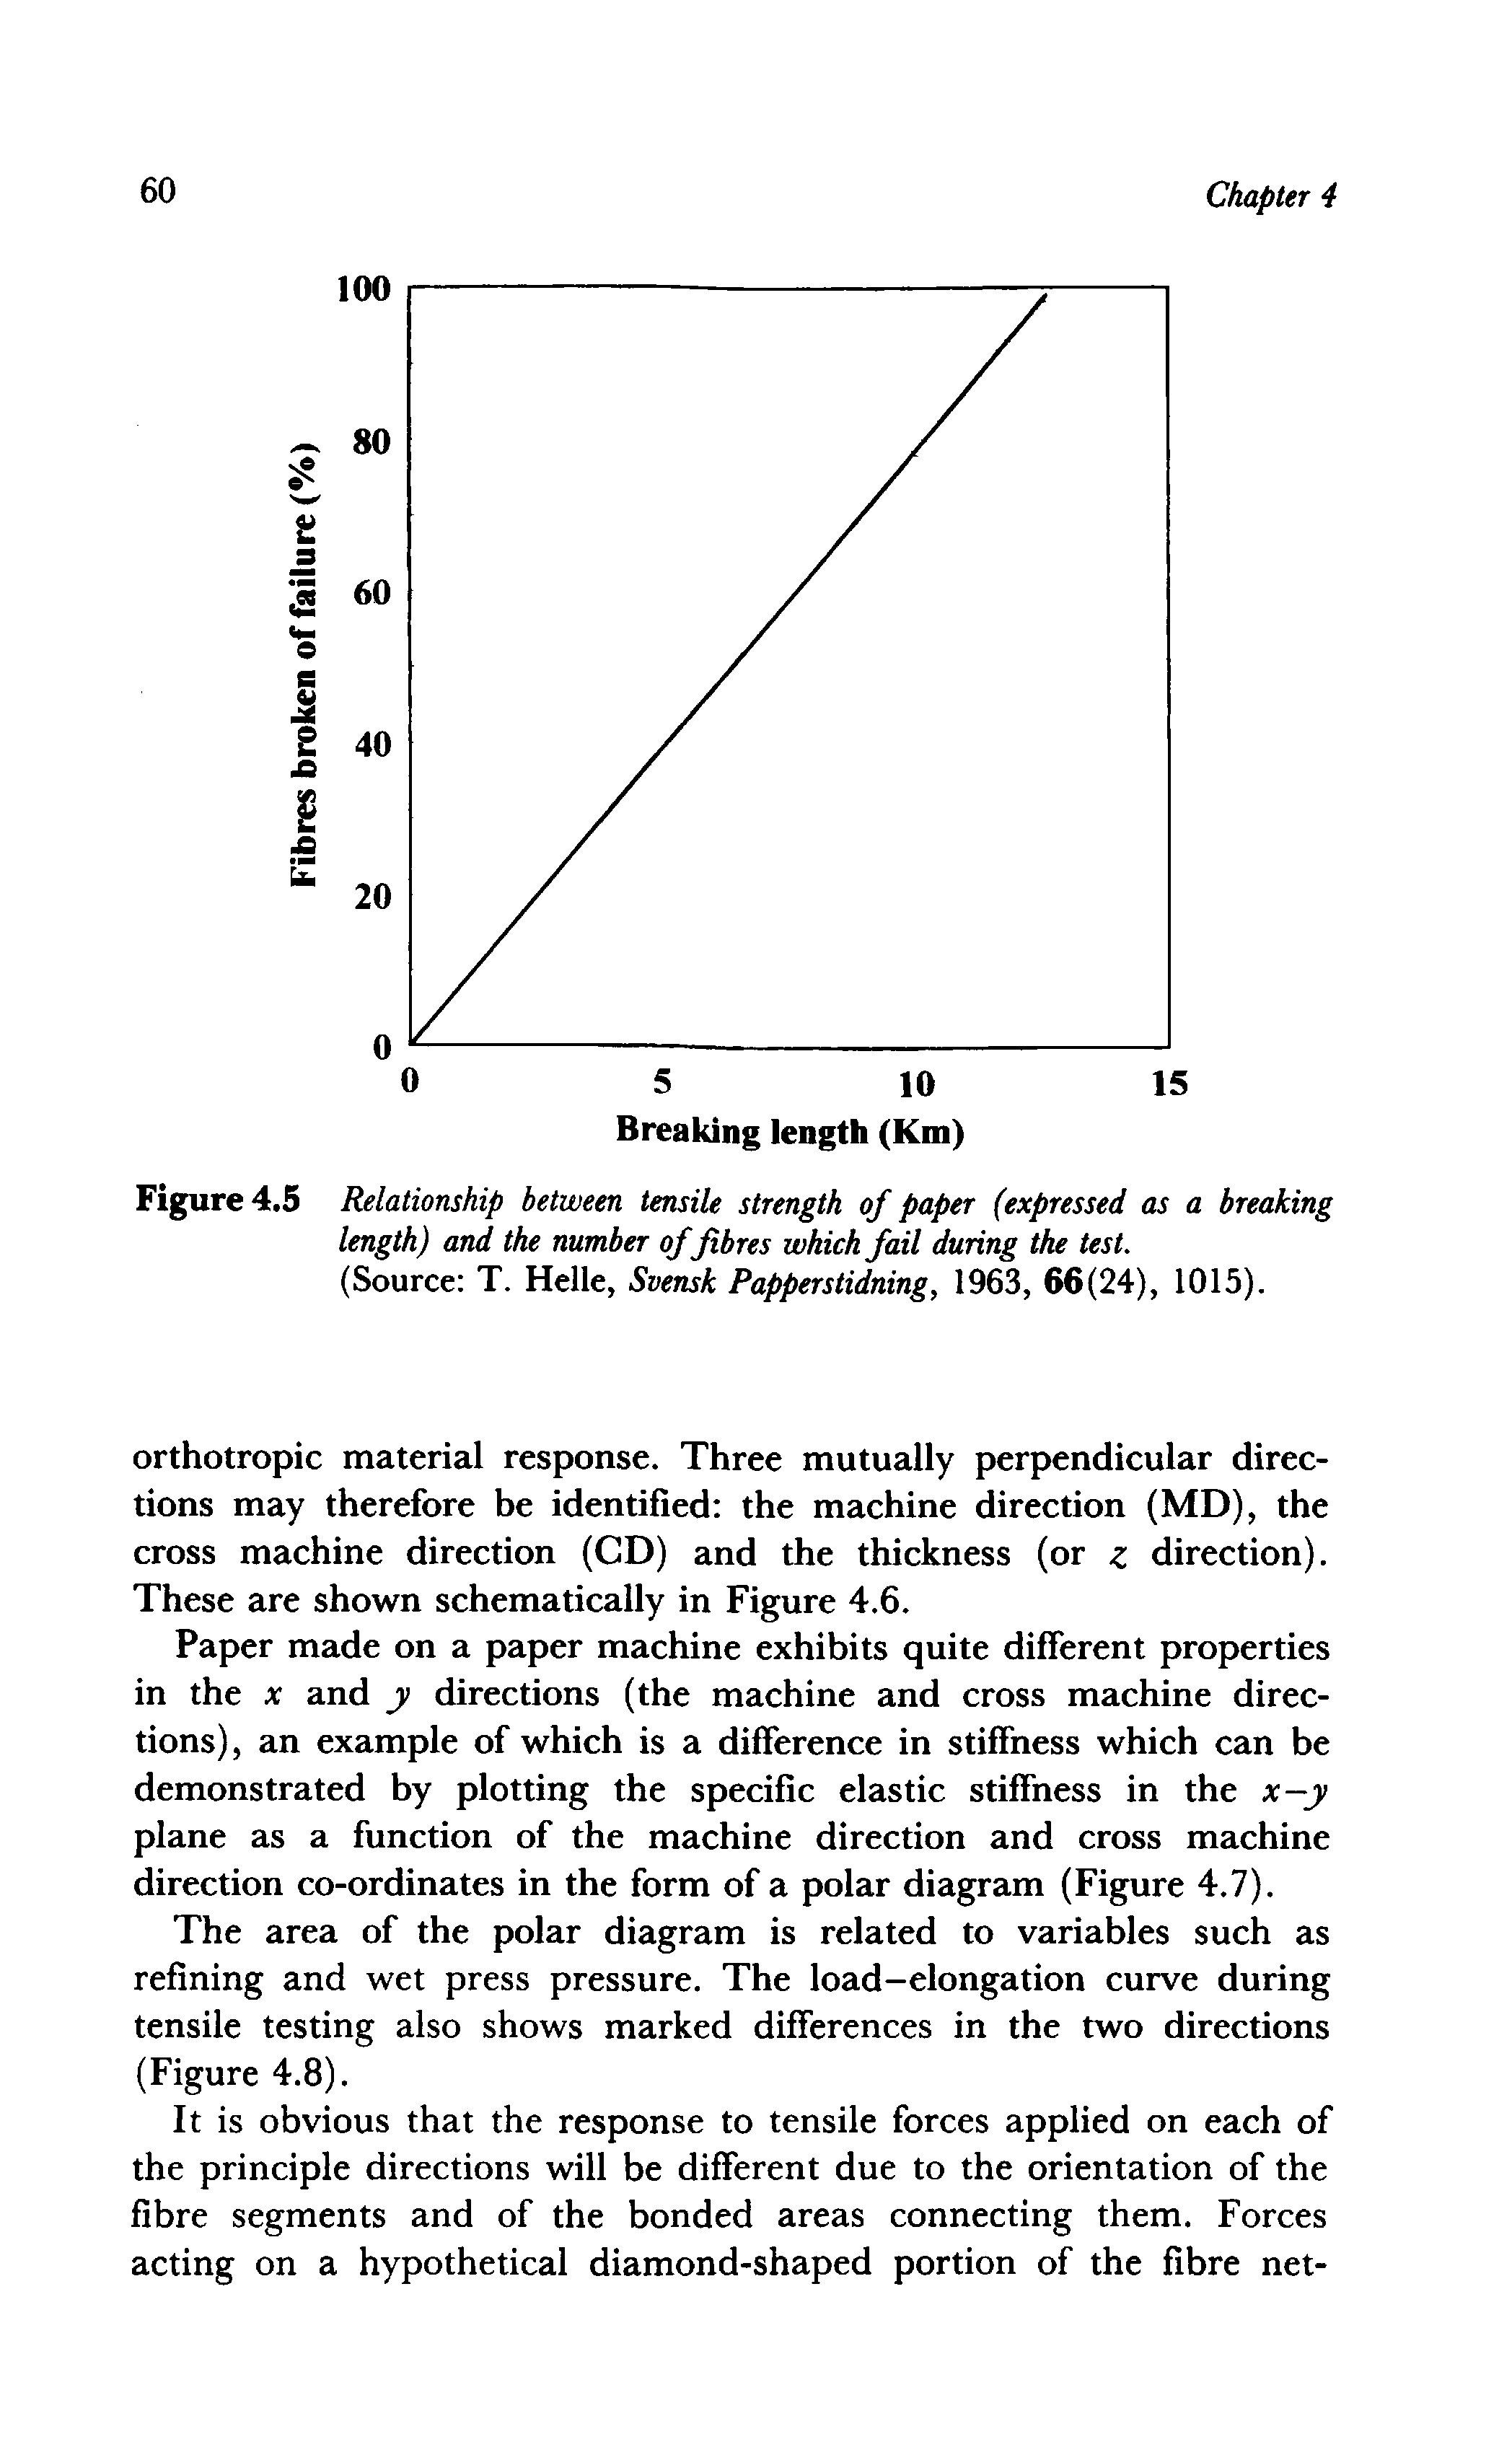 Figure 4.5 Relationship between tensile strength of paper (expressed as a breaking length) and the number of fibres which fail during the test.